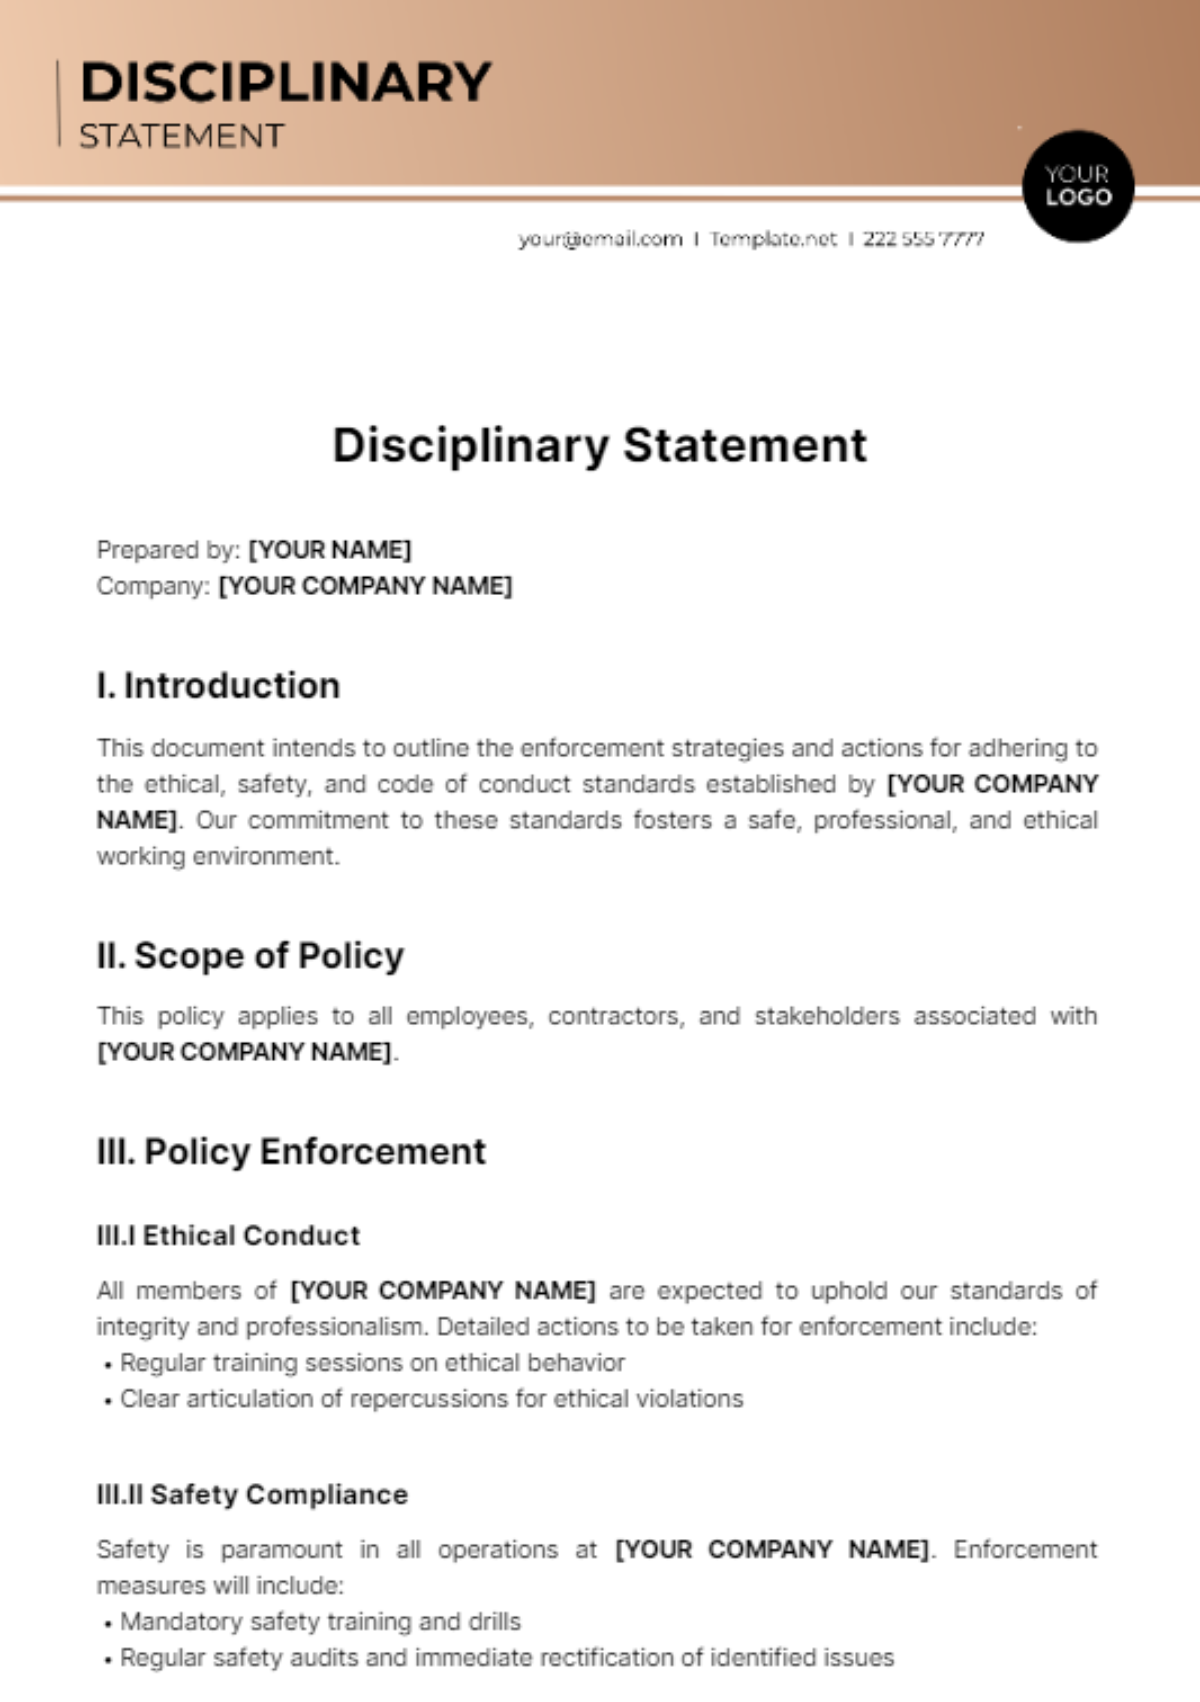 Disciplinary Statement Template